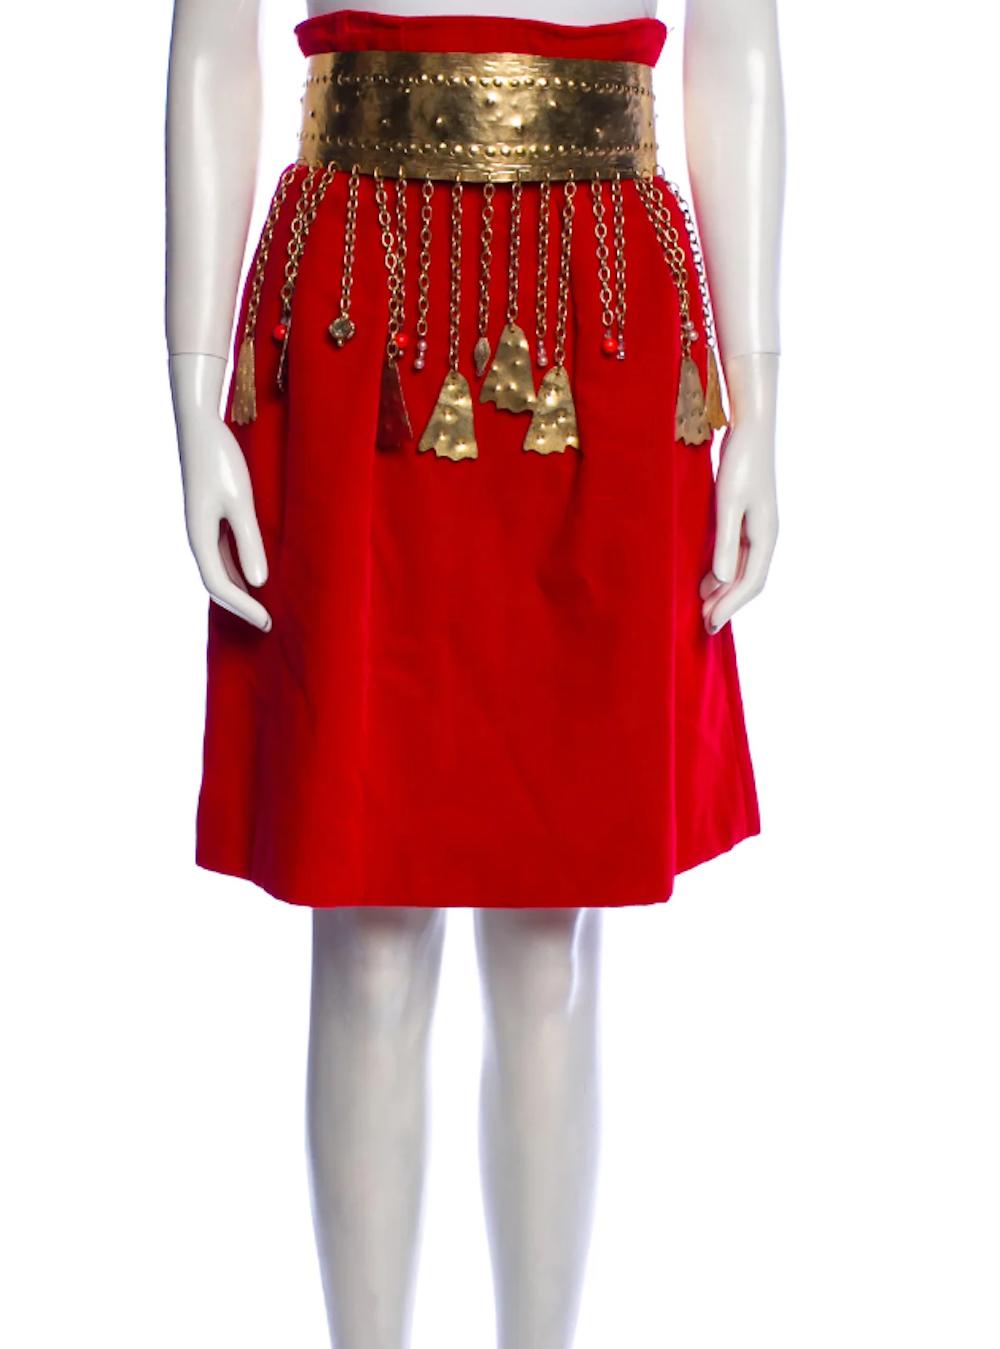 Rare two-piece skirt set from Haute Couture collection by Christian Lacroix. Jacket and skirt are lavishly decorated with studs and crystal accents. Metal belt with dangling tassels. 
Button closure. 
Collection 1988. 
Size: S. 
Size is not listed,